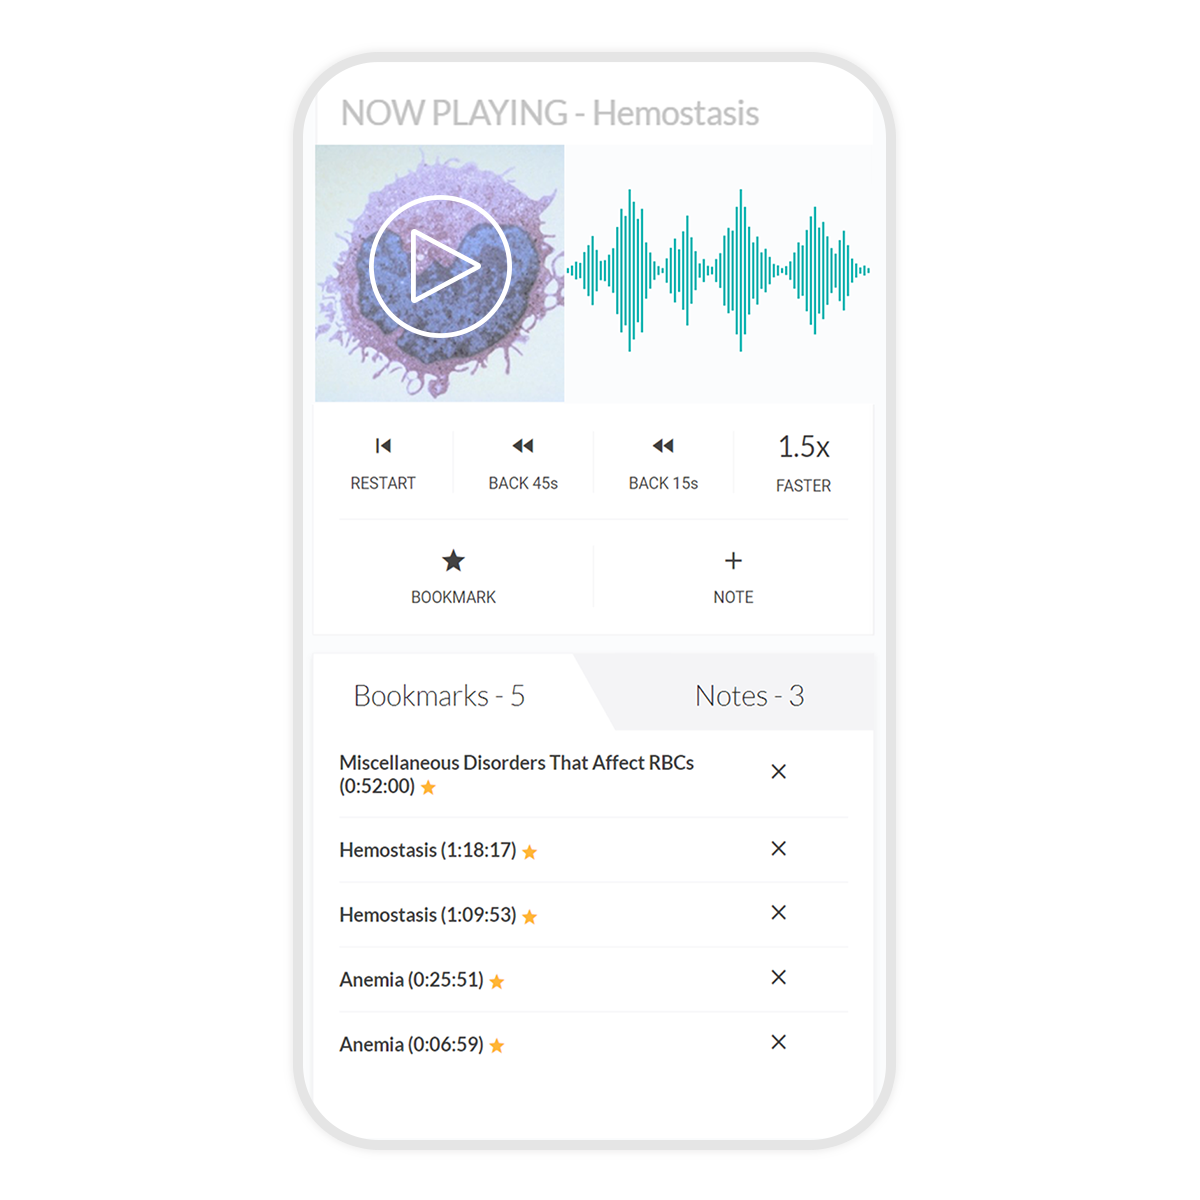 Core audio pearls playing on a mobile device. Bookmarks and notes section of the app can be seen on screen along with playback speed options